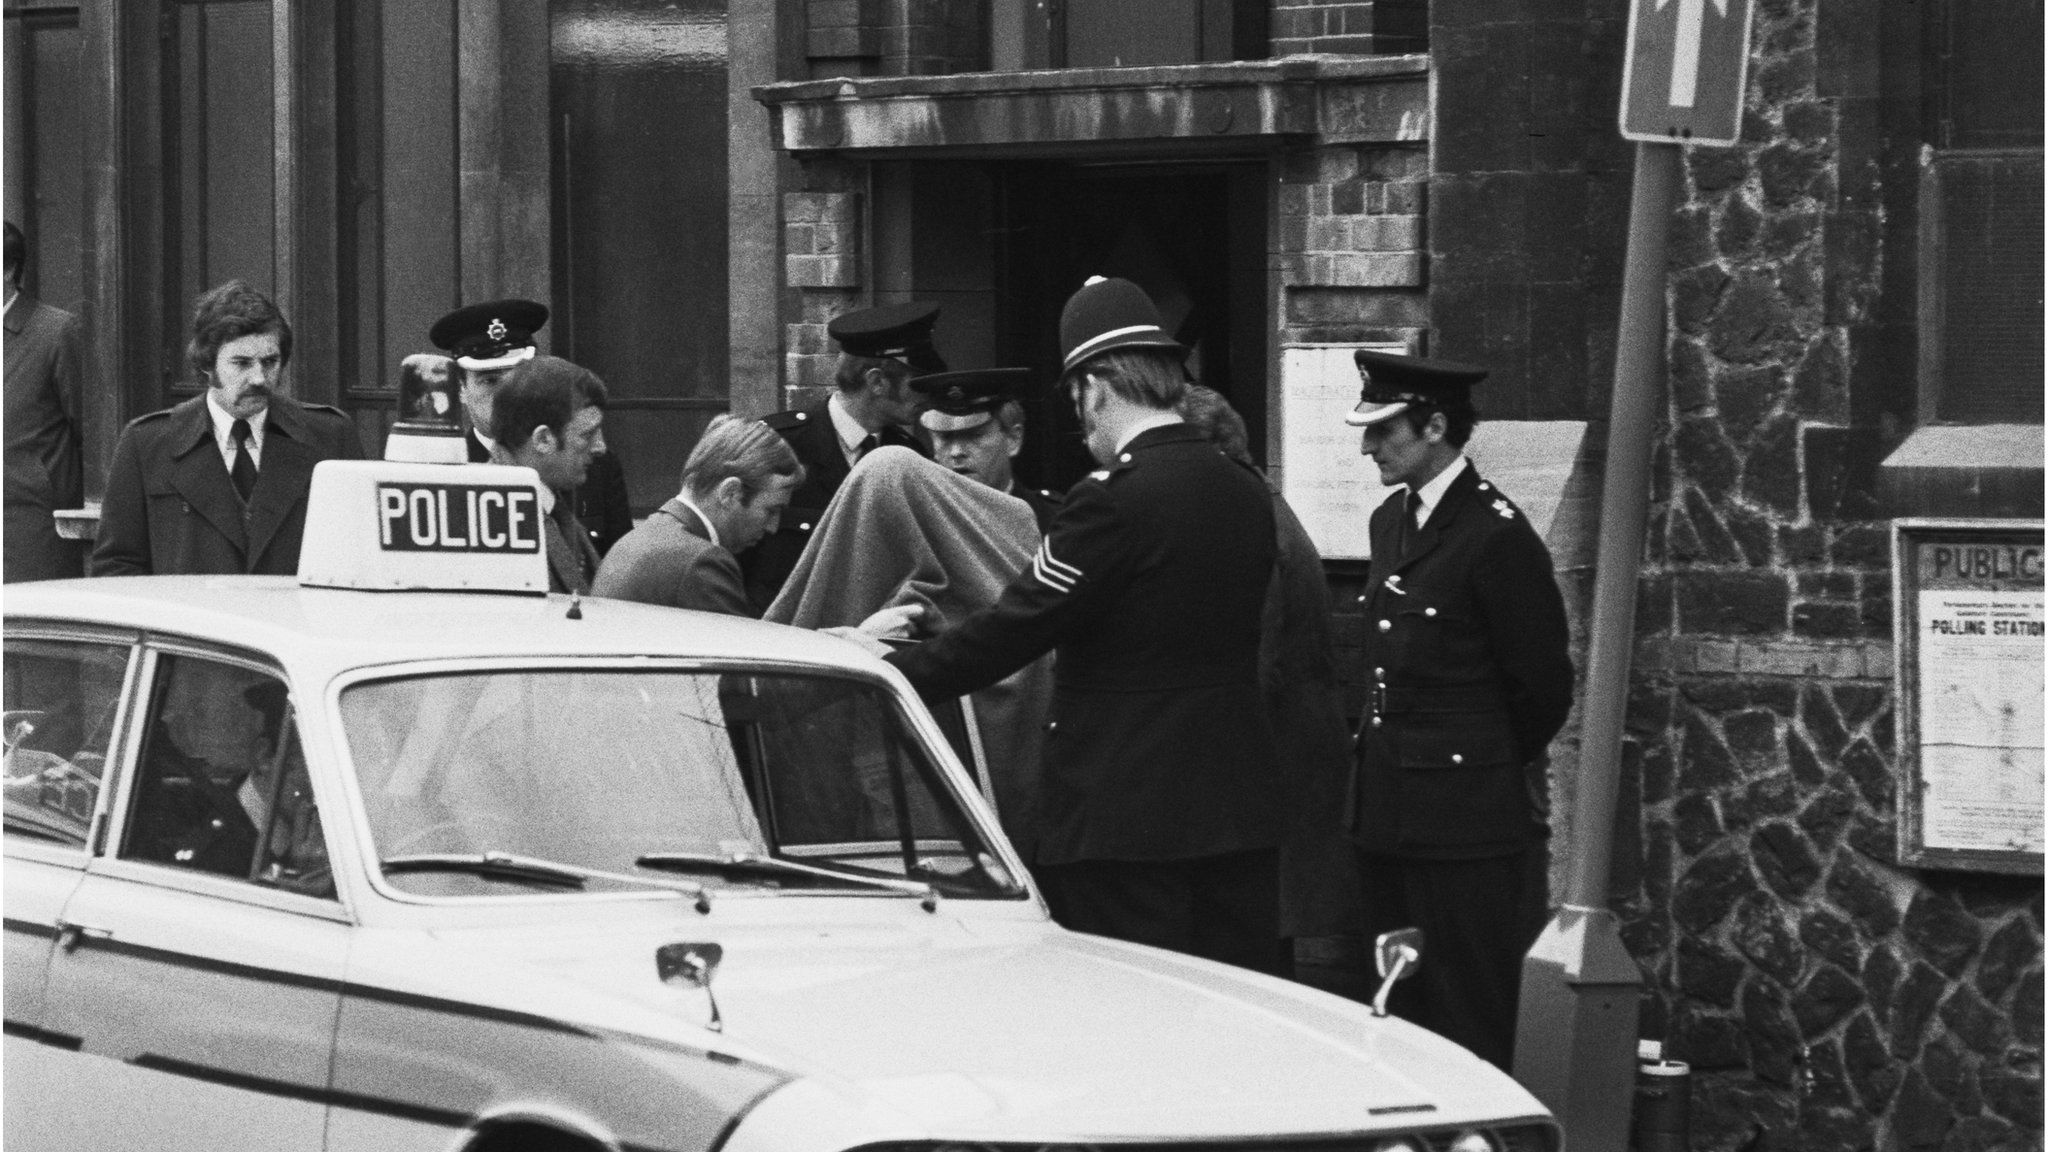 Police presence outside the court in Guildford where the Guildford Four first appeared in 1974 before their trial